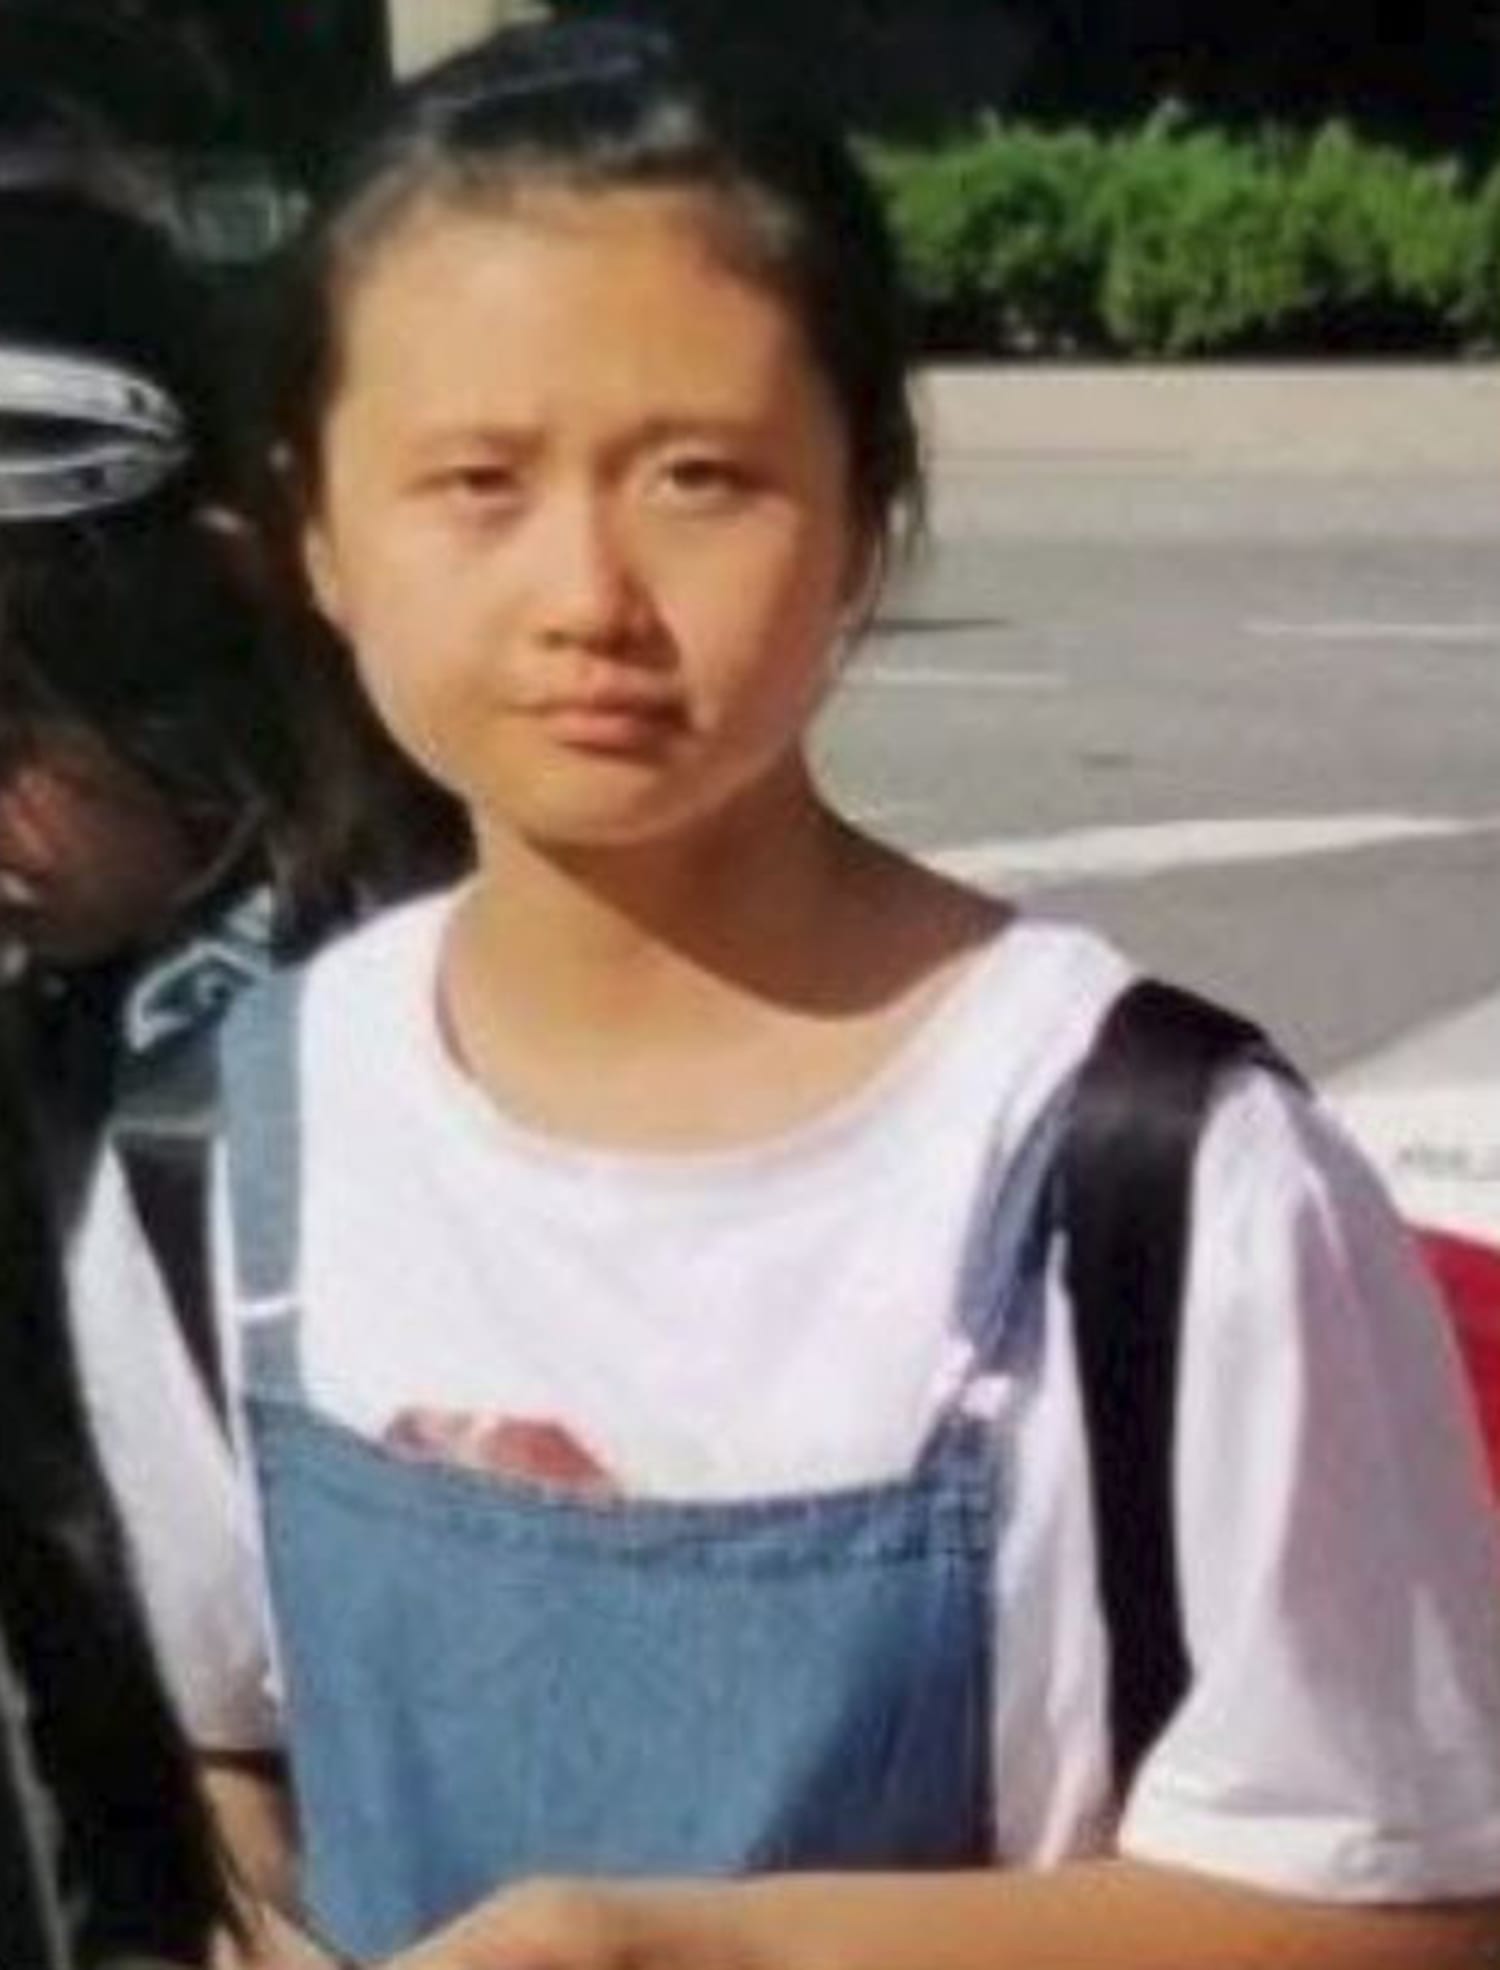 12 year old asian girl abducted.from raegan airport